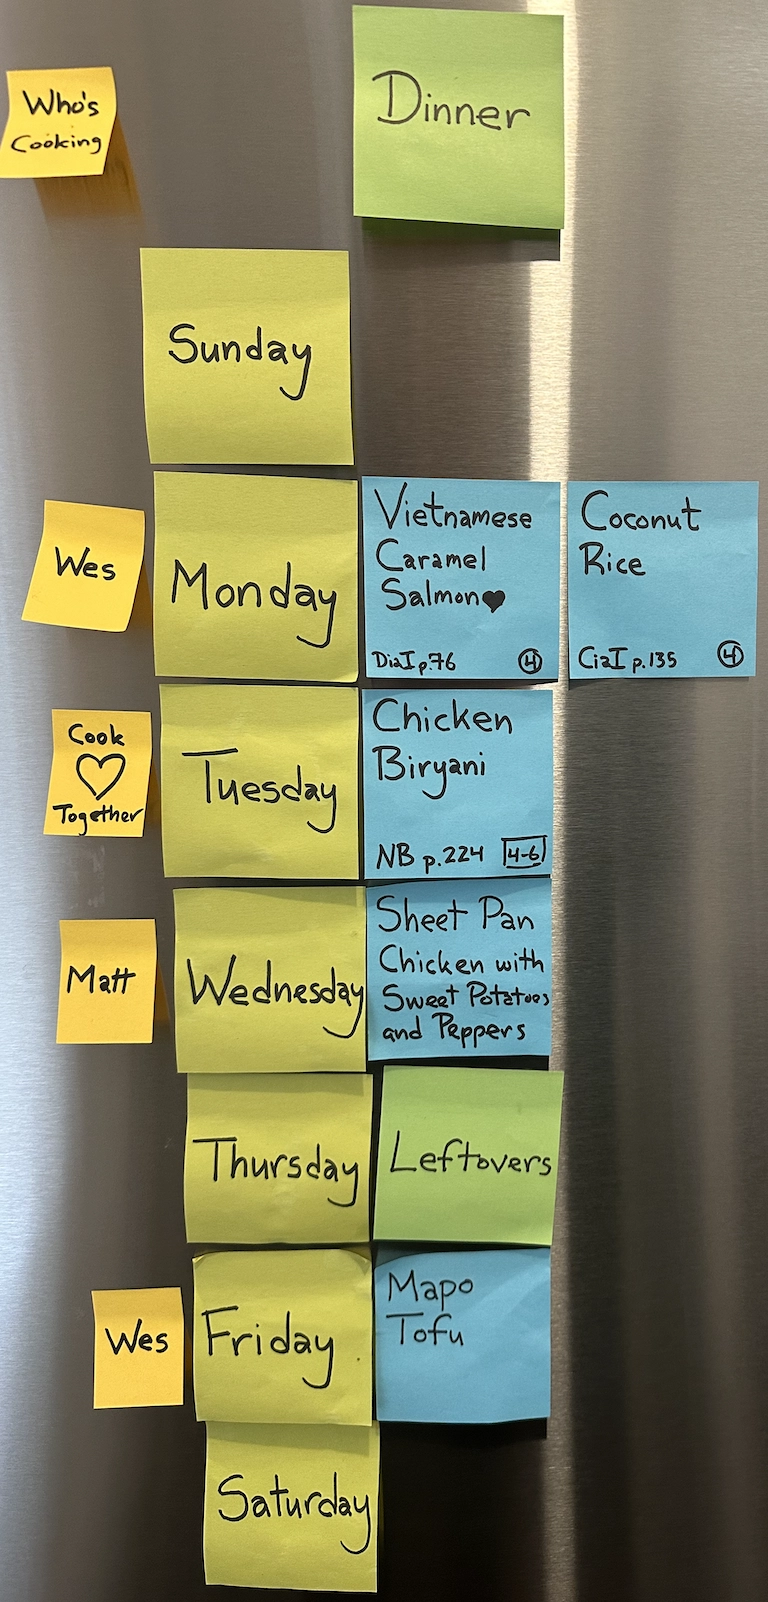 A picture a refrigerator with post-it notes for each day of the week affixed in a column. Next to each day is a post-it note with a different recipe.